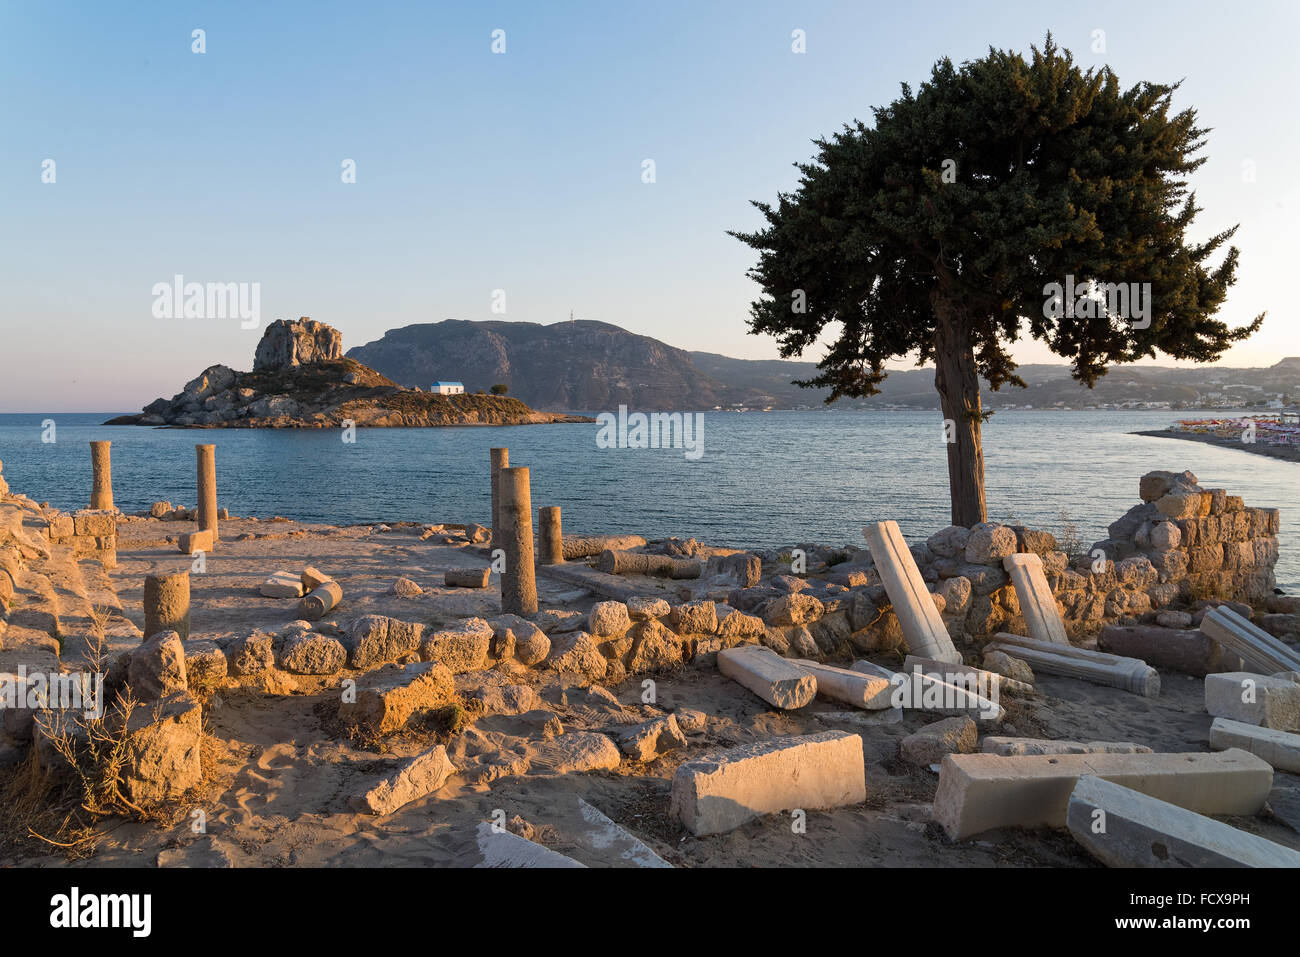 Landscape with archaeological site and islet at sunset in Kos island, Greece Stock Photo